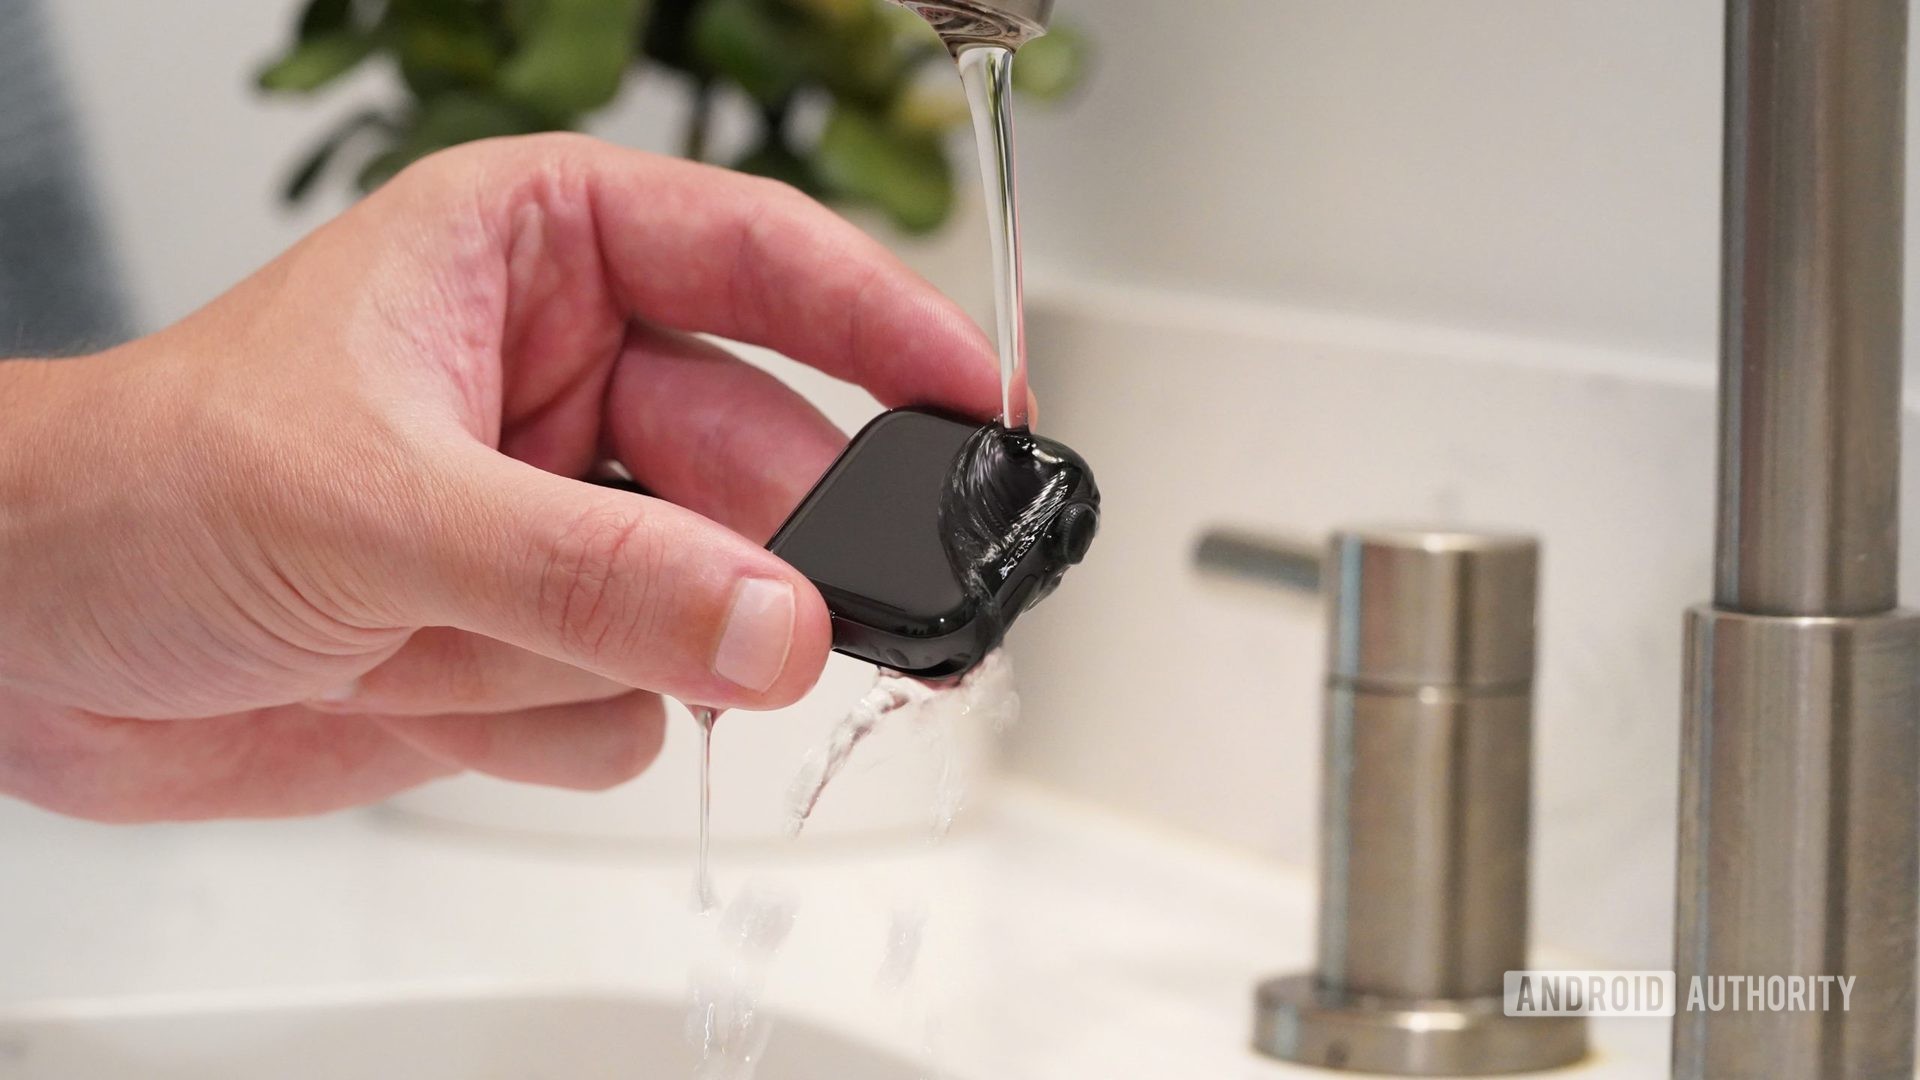 Man's hand holding Apple Watch Series 6 under low, running warm water to clean the device.